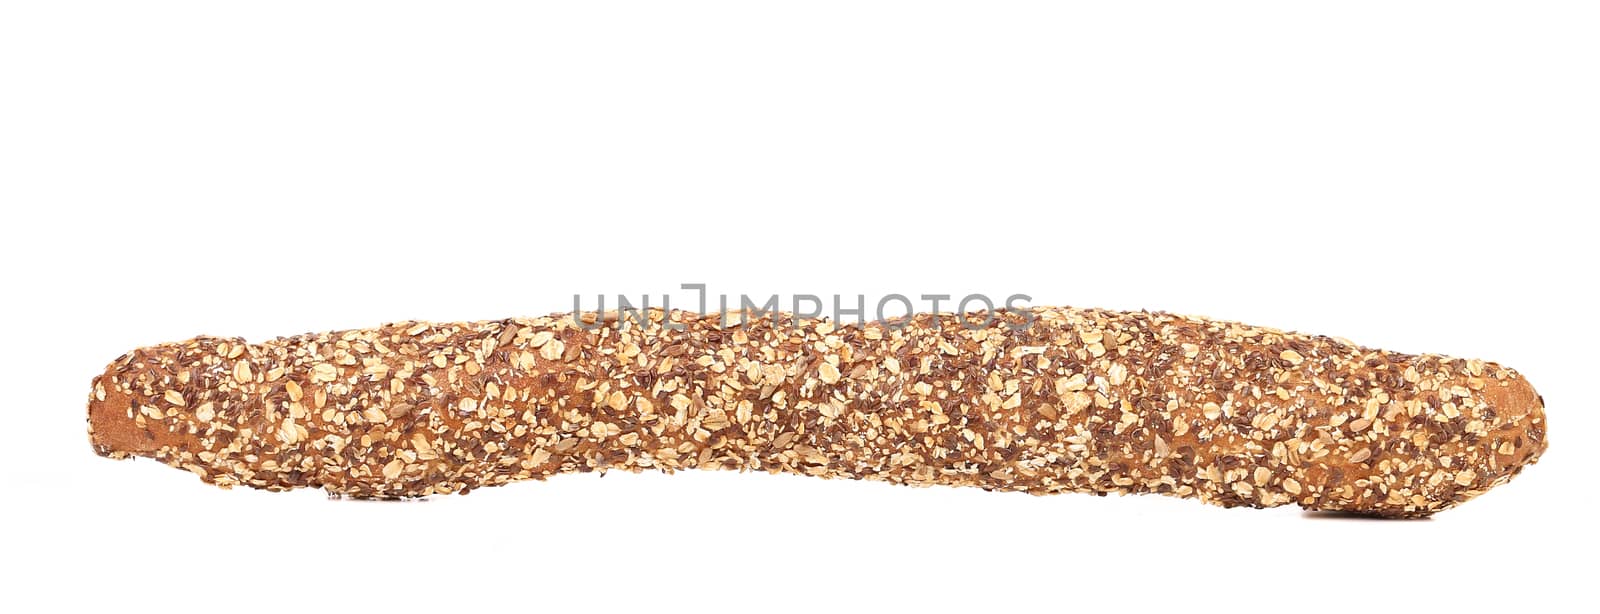 Bread with oat flakes and sesame seeds. Isolated on a white background.